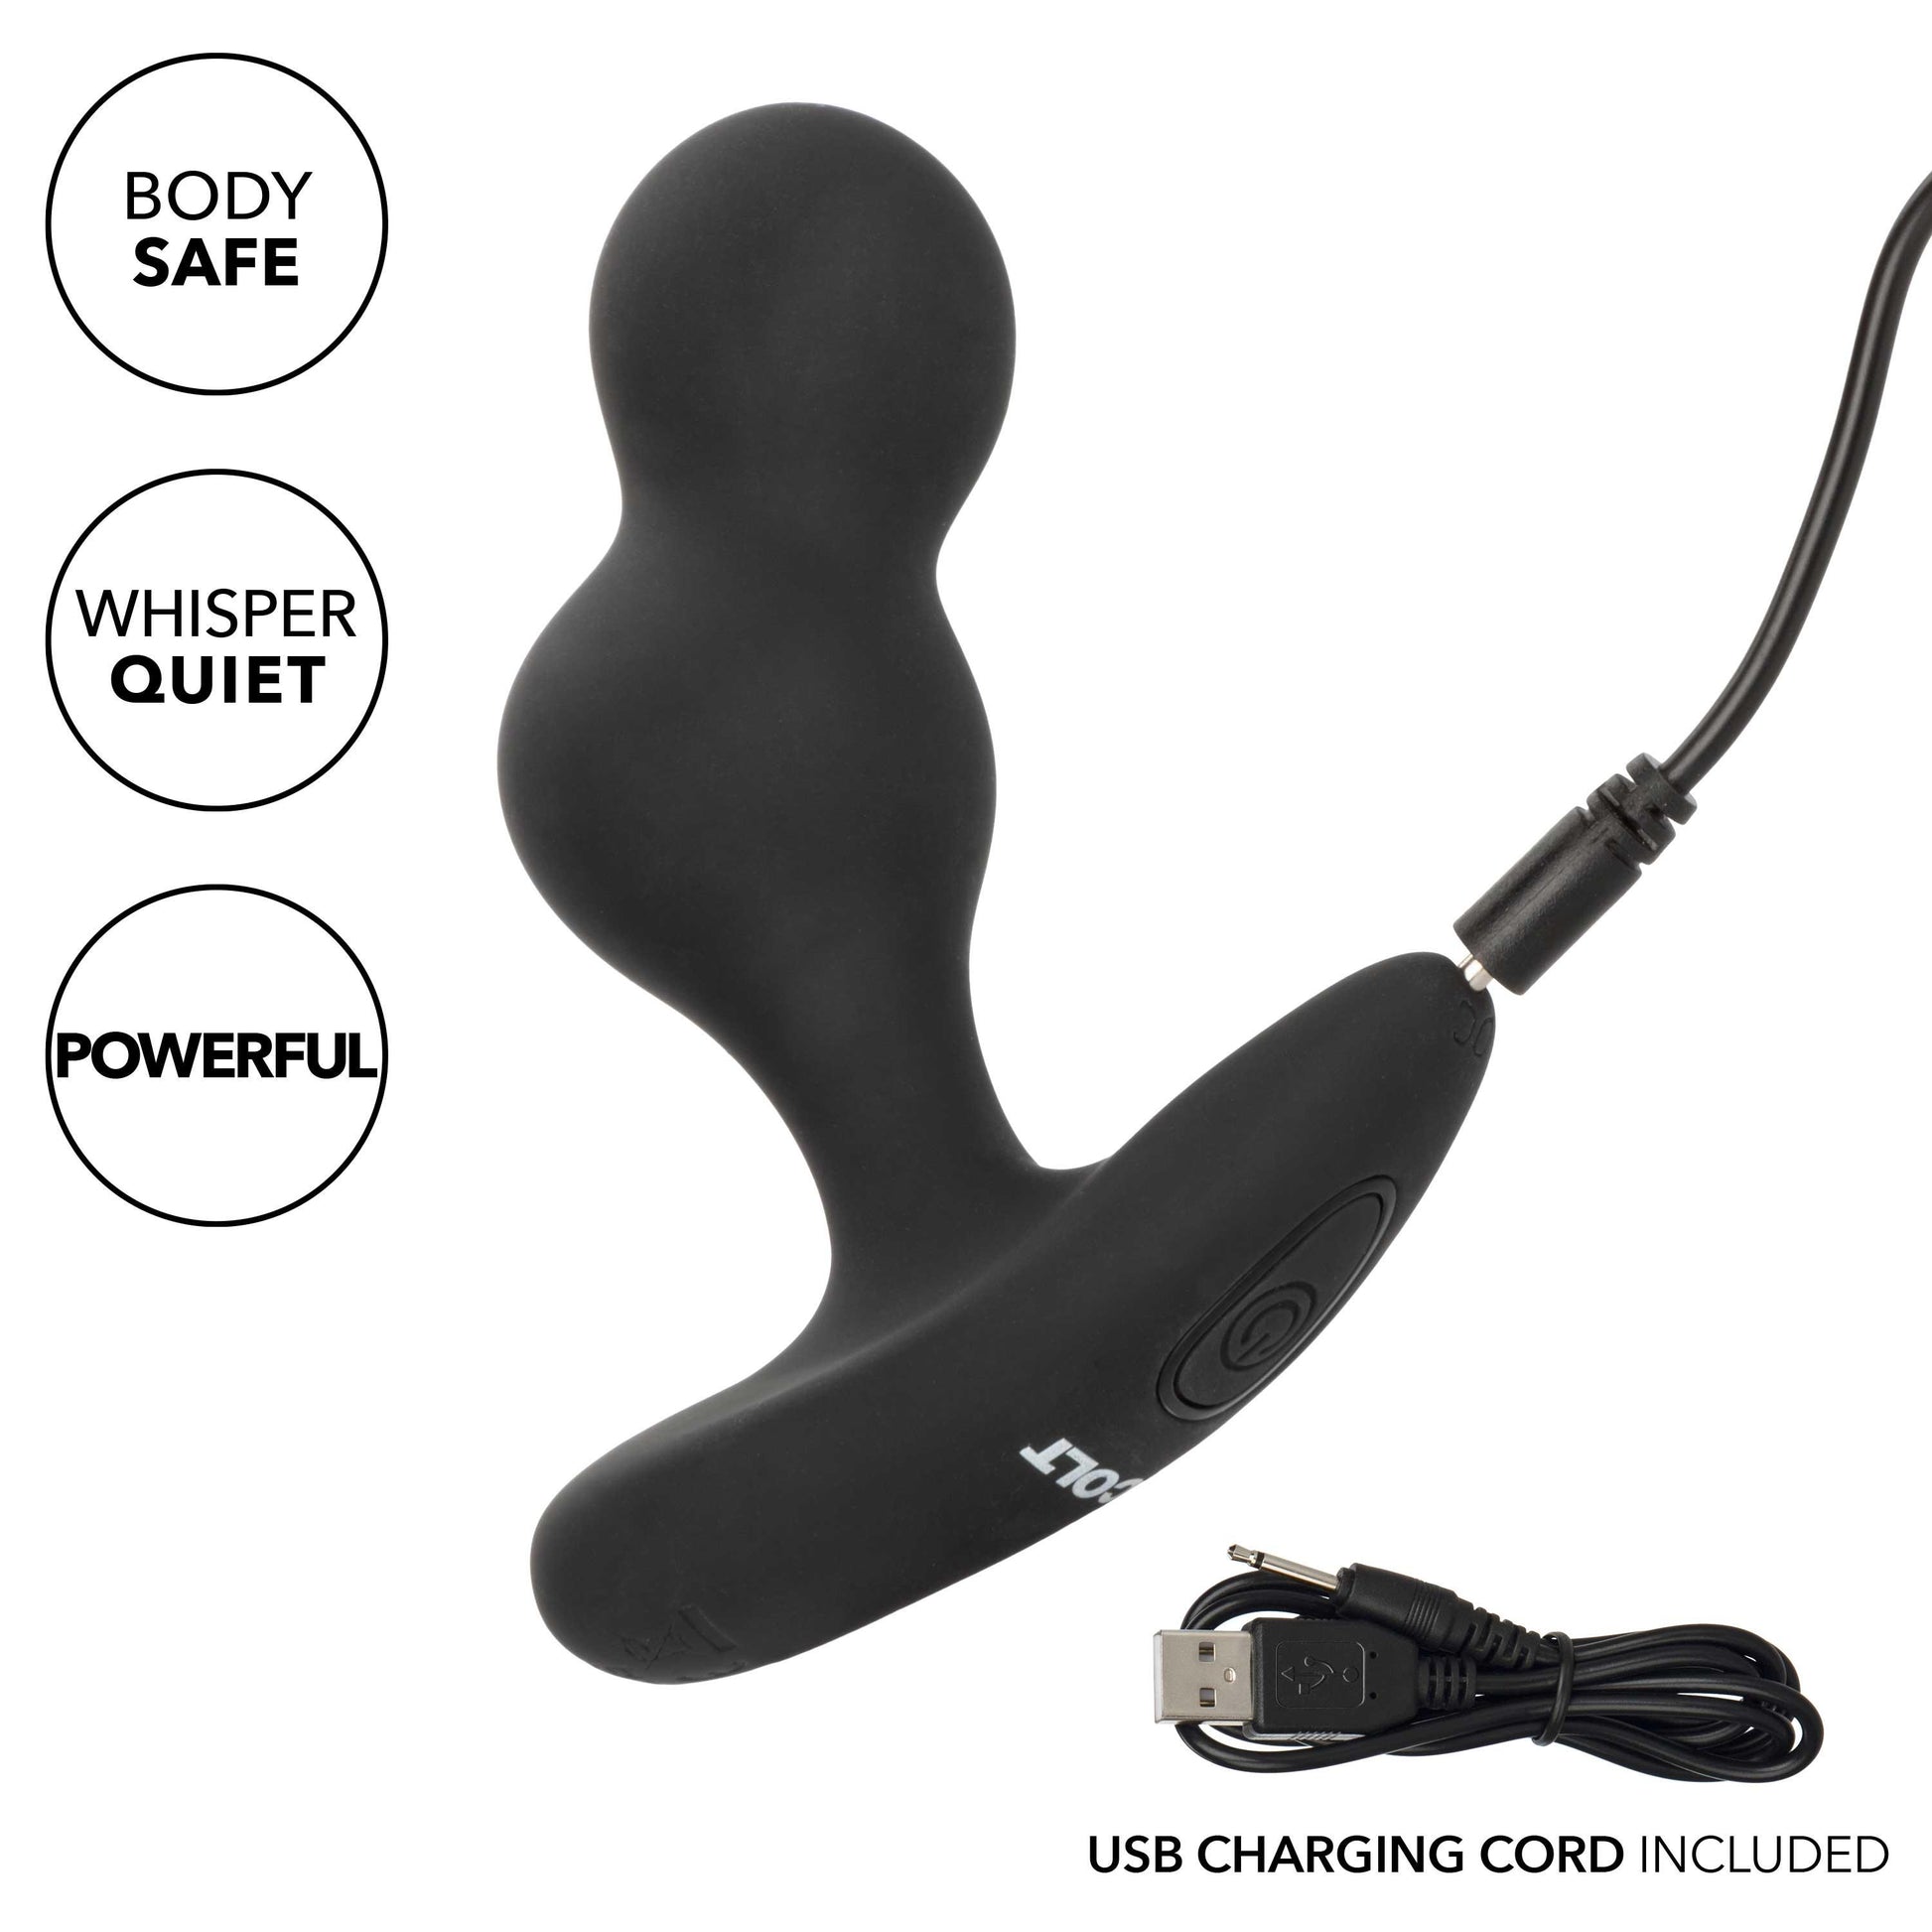 Colt Rechargeable Anal-T - Black - My Sex Toy Hub